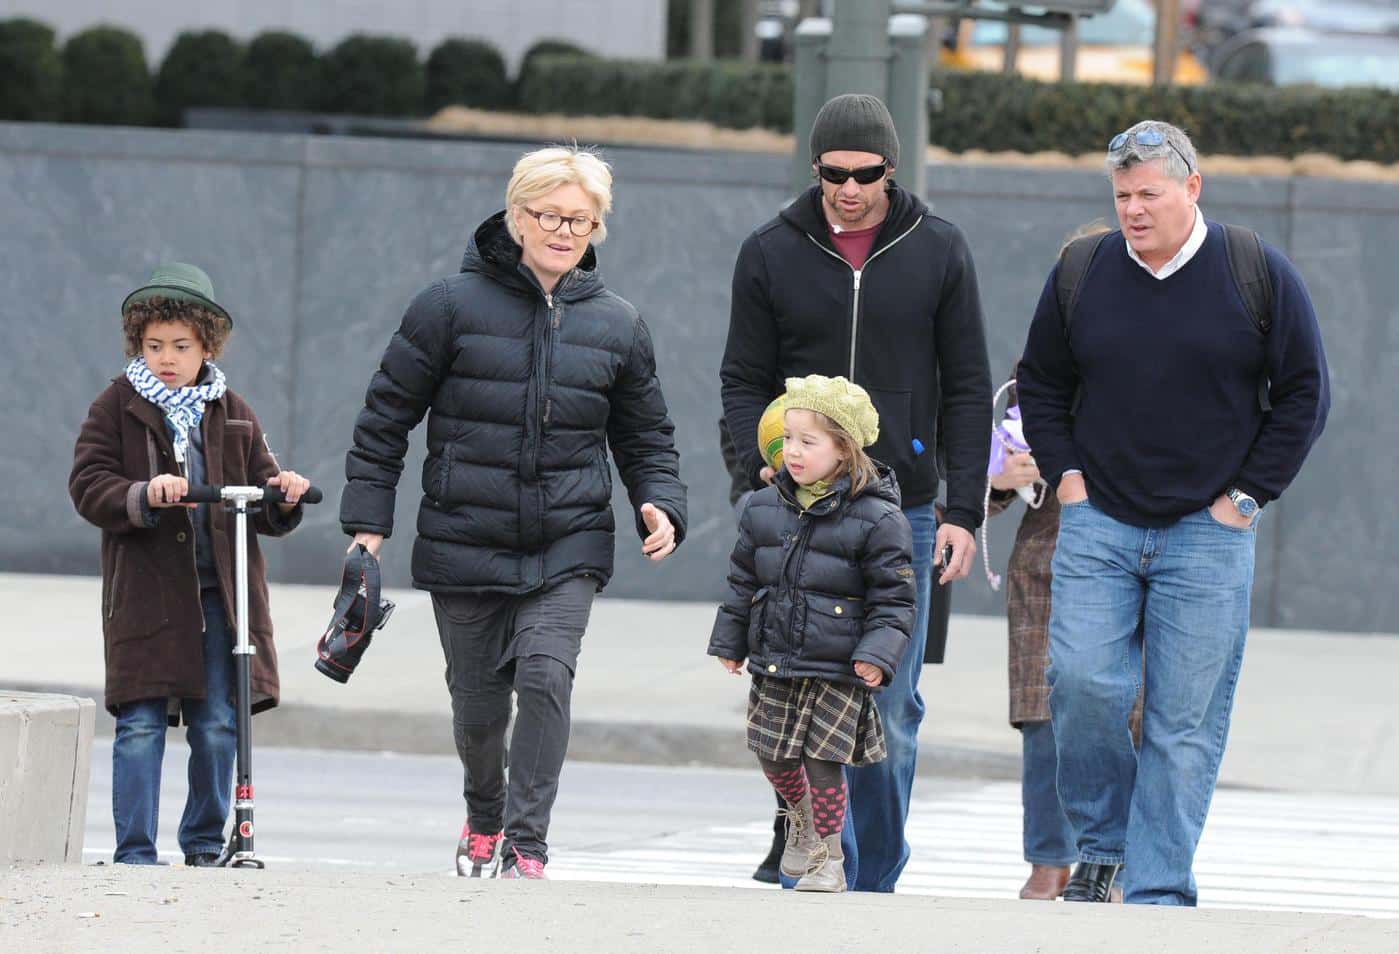 RESTRICTIONS APPLY: Hugh Jackman, his wife Deborra Lee Furness, and their children Ava Eliot and Oscar Maximillian enjoy a beautiful day in the park in New York City